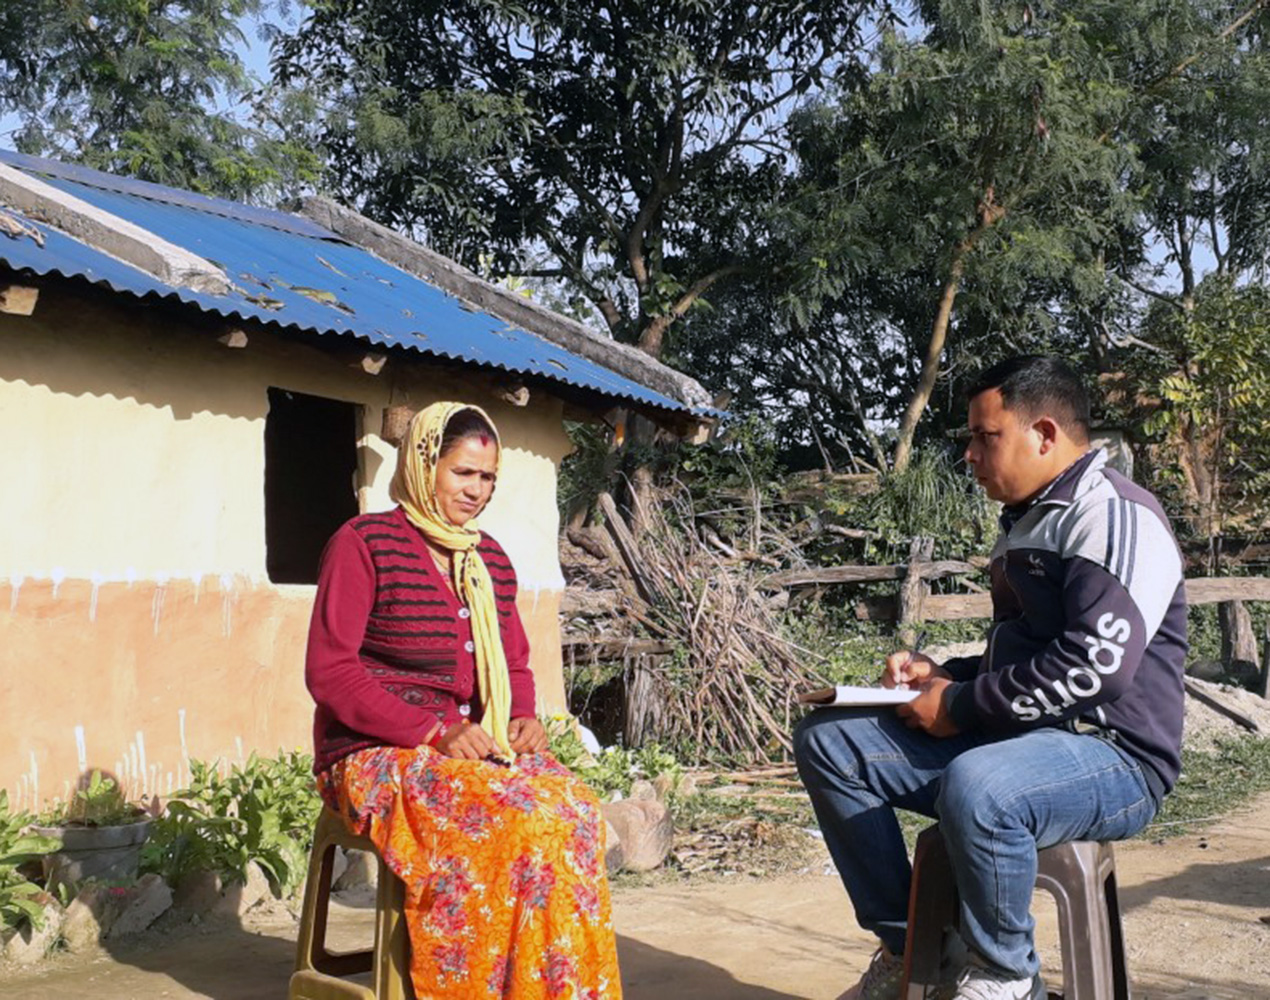 Freed Haliya woman Tulacchi Chaudhary sits in front of her home, being interviewed.